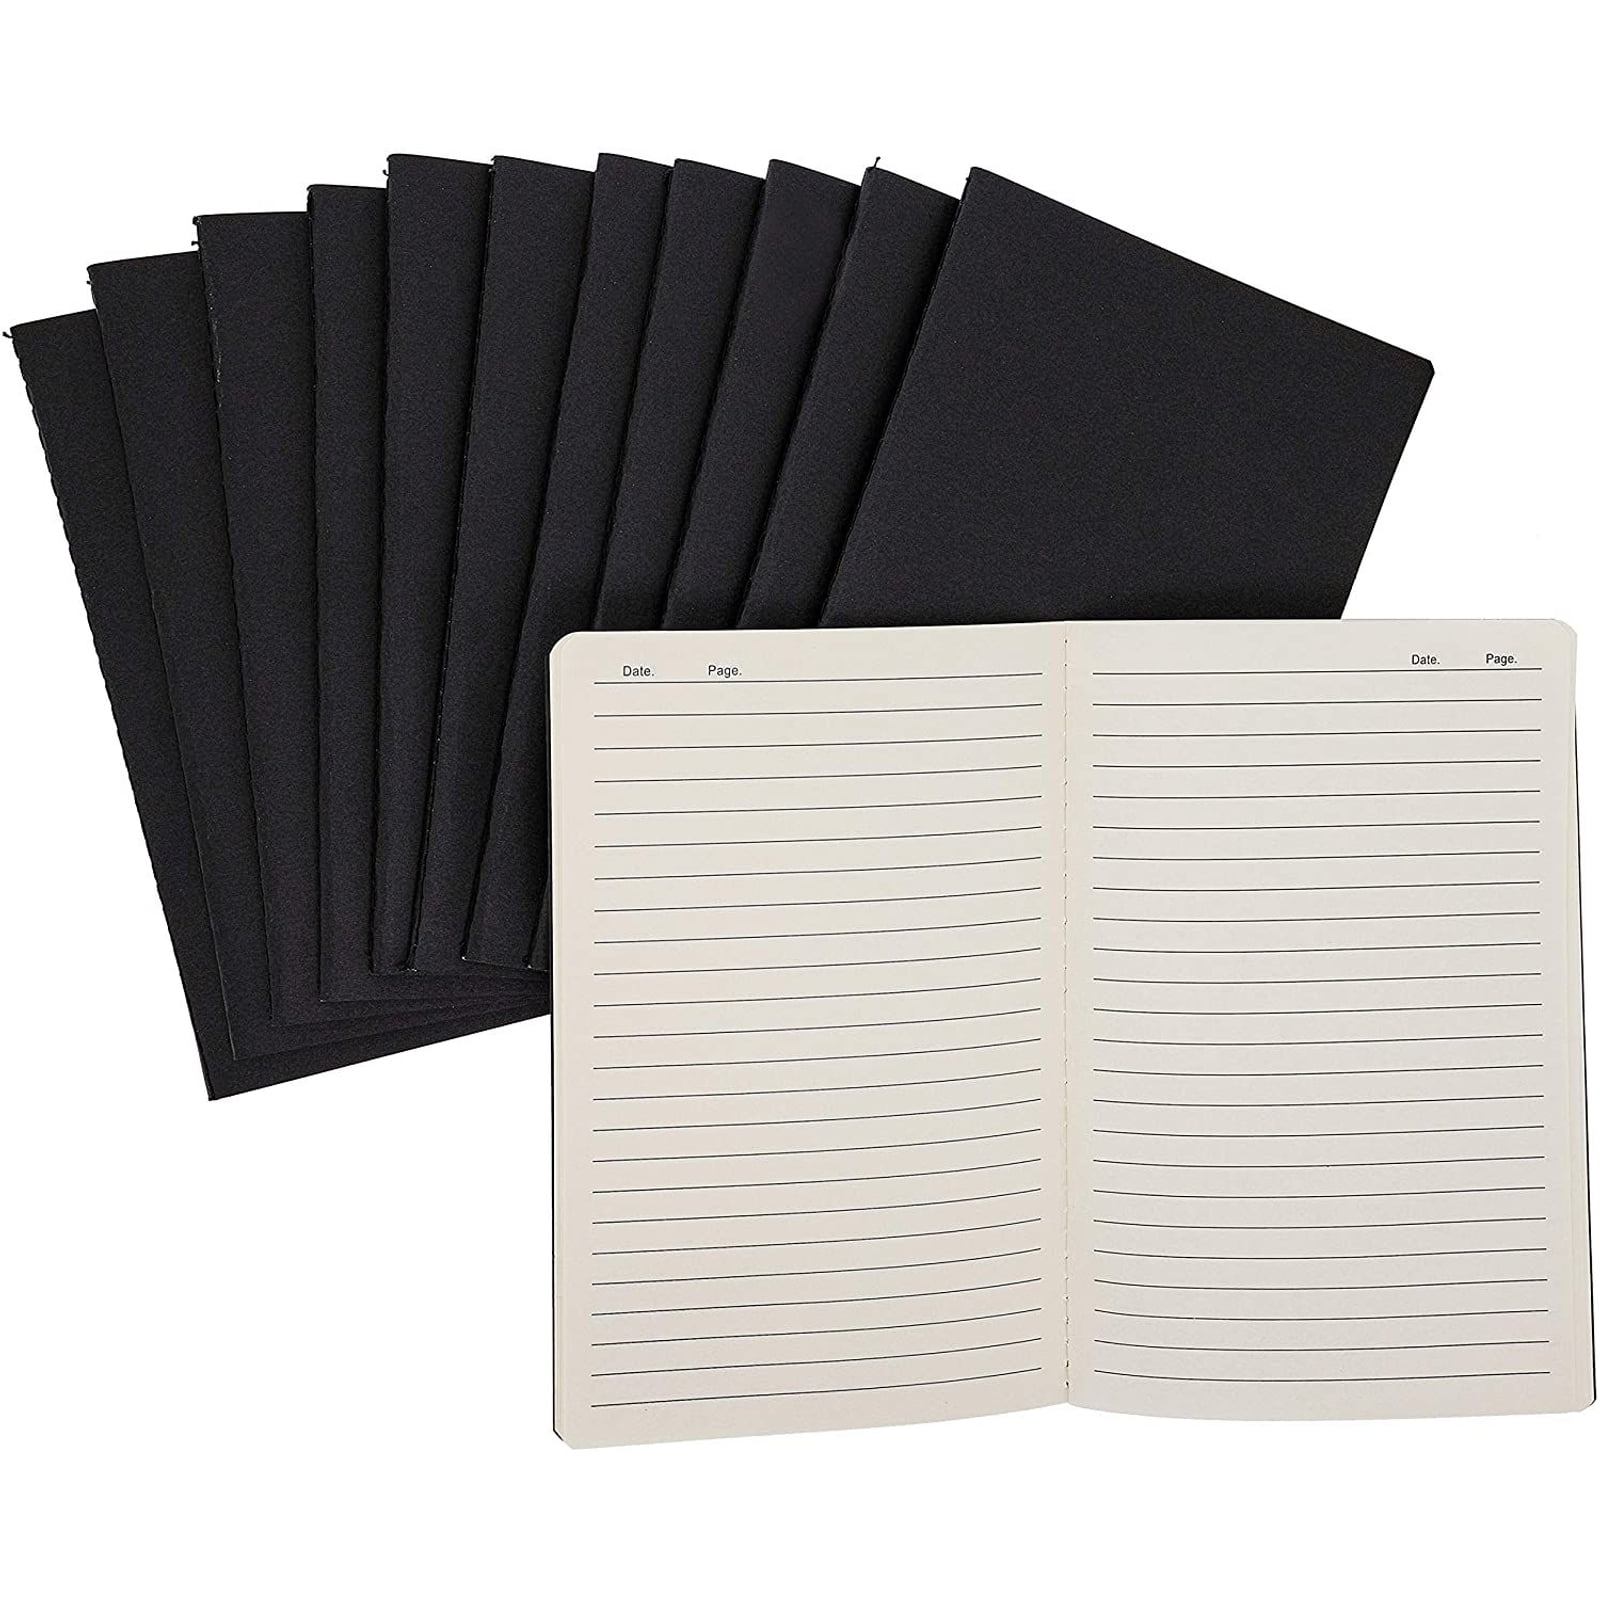  EOOUT 12 Pack Pastel Journals for Writing Bulk, 5.5 x